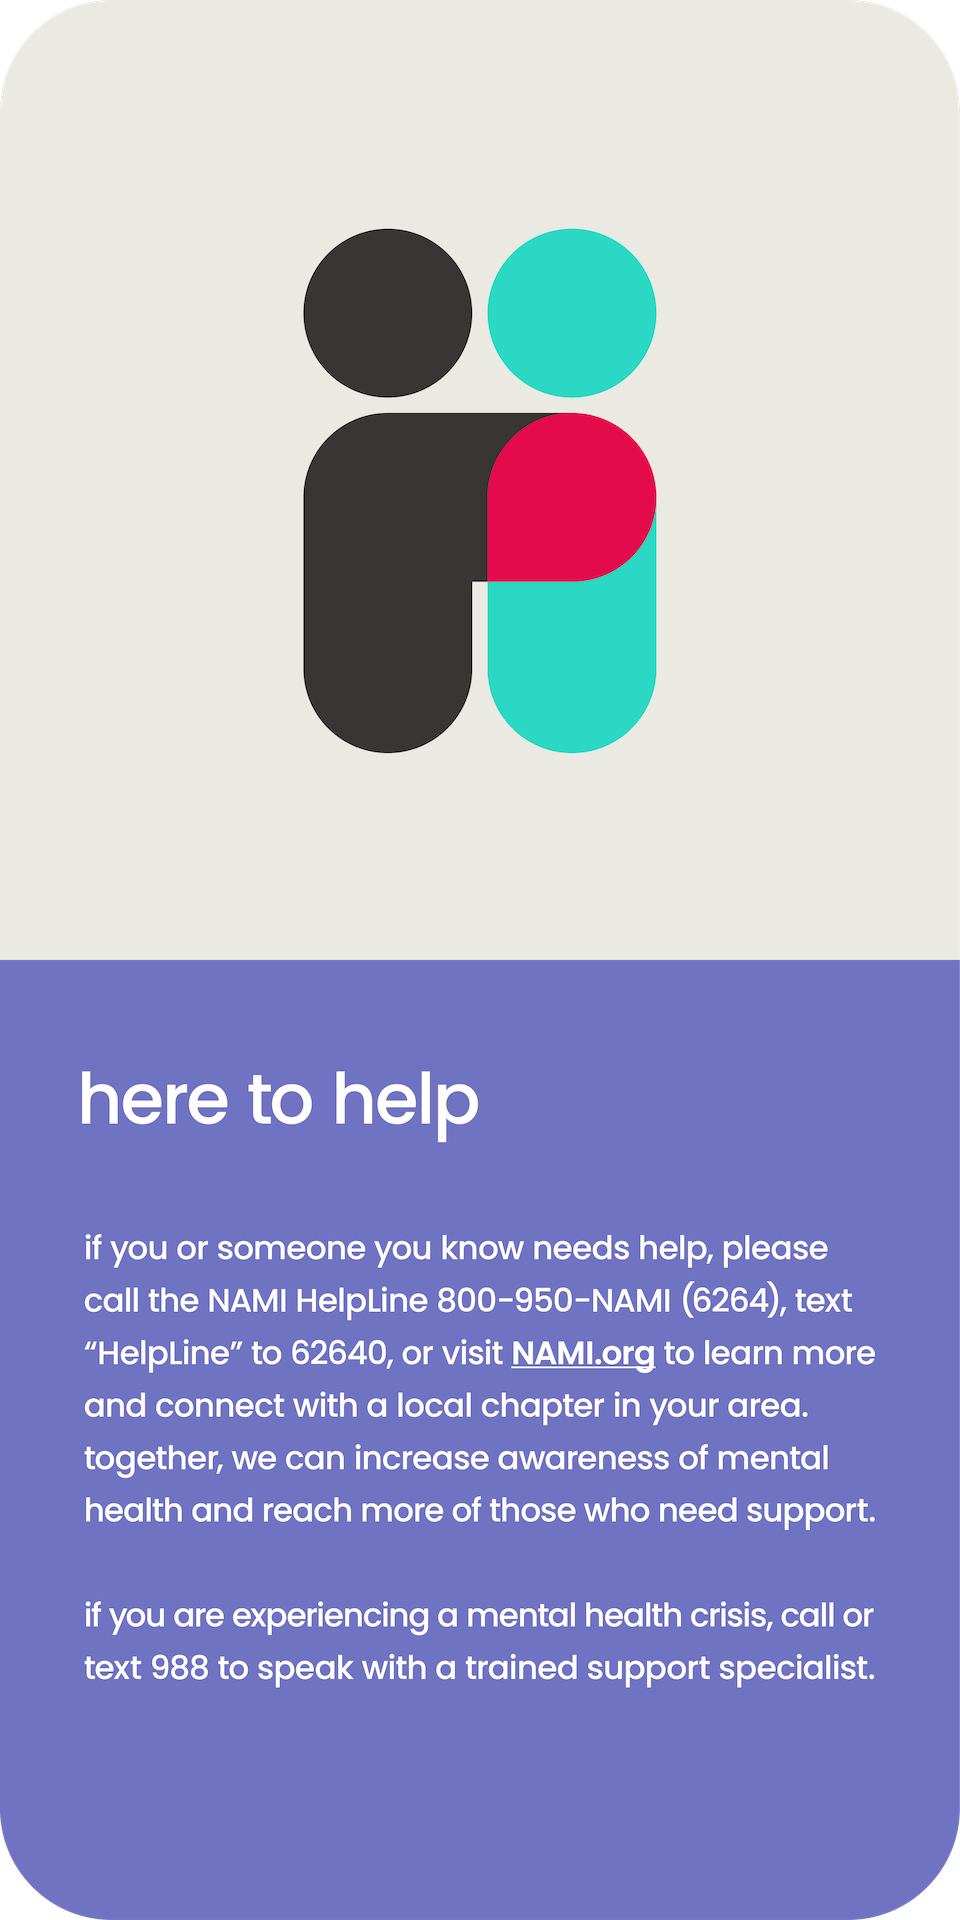 here to help. If you or someone you know needs help, please call the NAMI helpline 800-950-6264, texting Helpline to 62640 or visit NAMI.org.  If you are experiencing a mental health crisis, call or text 988 to speak with a trained support specialist. 